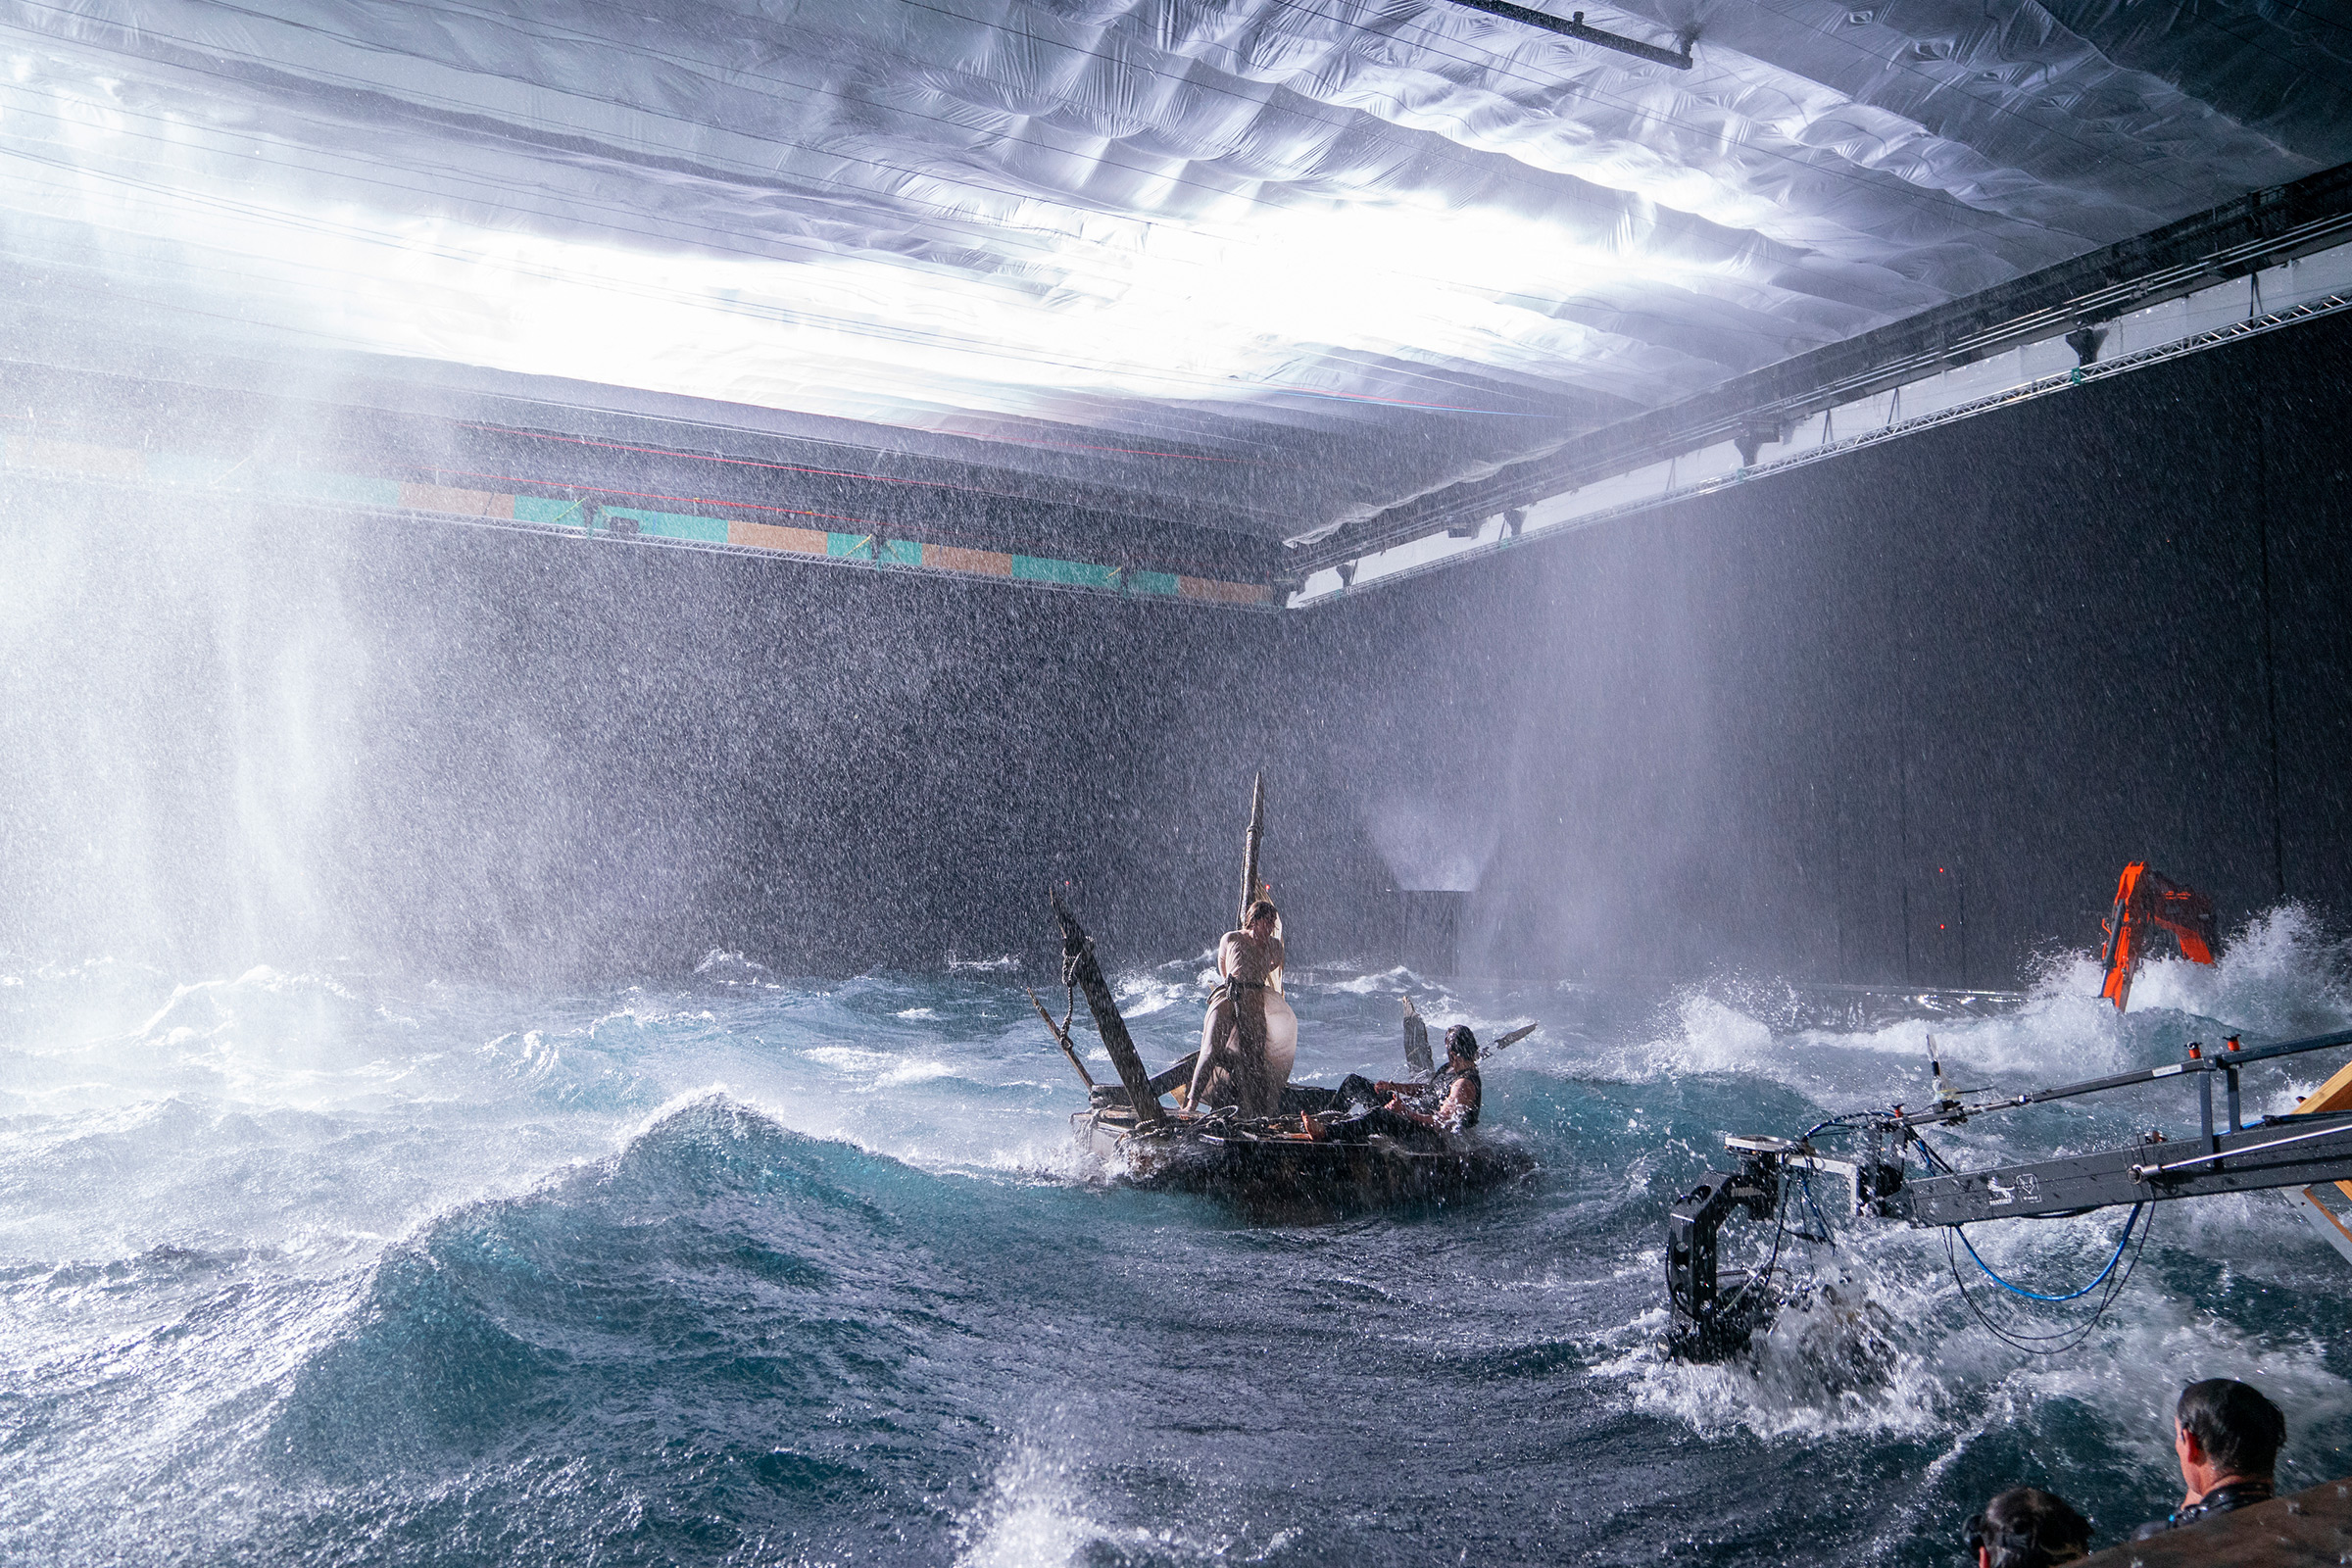 Galadriel (Morfydd Clark) and Halbrand (Charlie Vickers) grapple with a fake storm while filming in a massive water tank (Ben Rothstein—Prime Video)